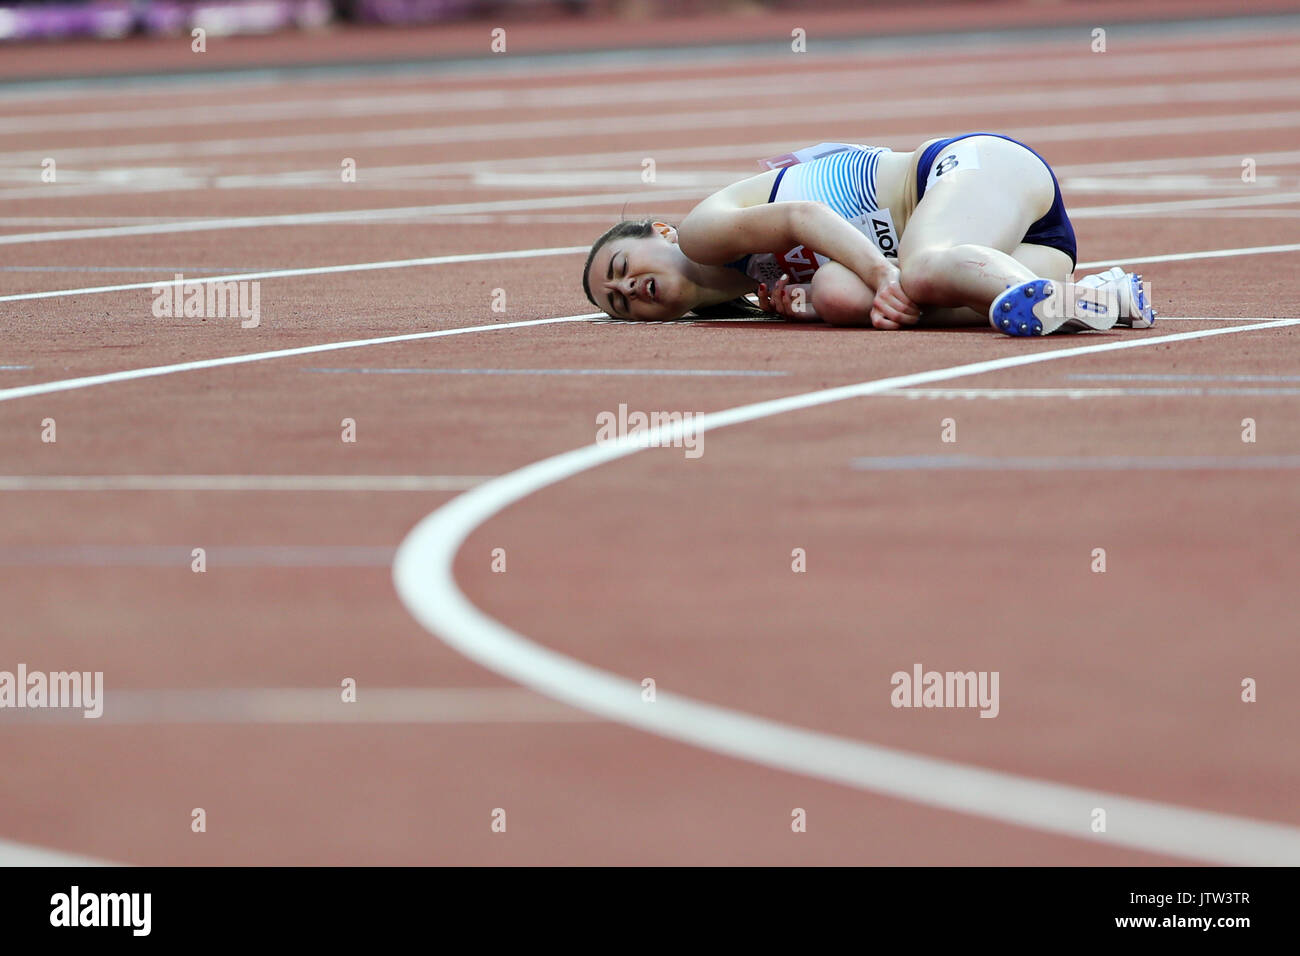 London, UK. 10-Aug-17. Laura MUIR (Great Britain) exhausted after running in the Women's 5000m Heat 1 at the 2017 IAAF World Championships, Queen Elizabeth Olympic Park, Stratford, London, UK. Credit: Simon Balson/Alamy Live News Stock Photo